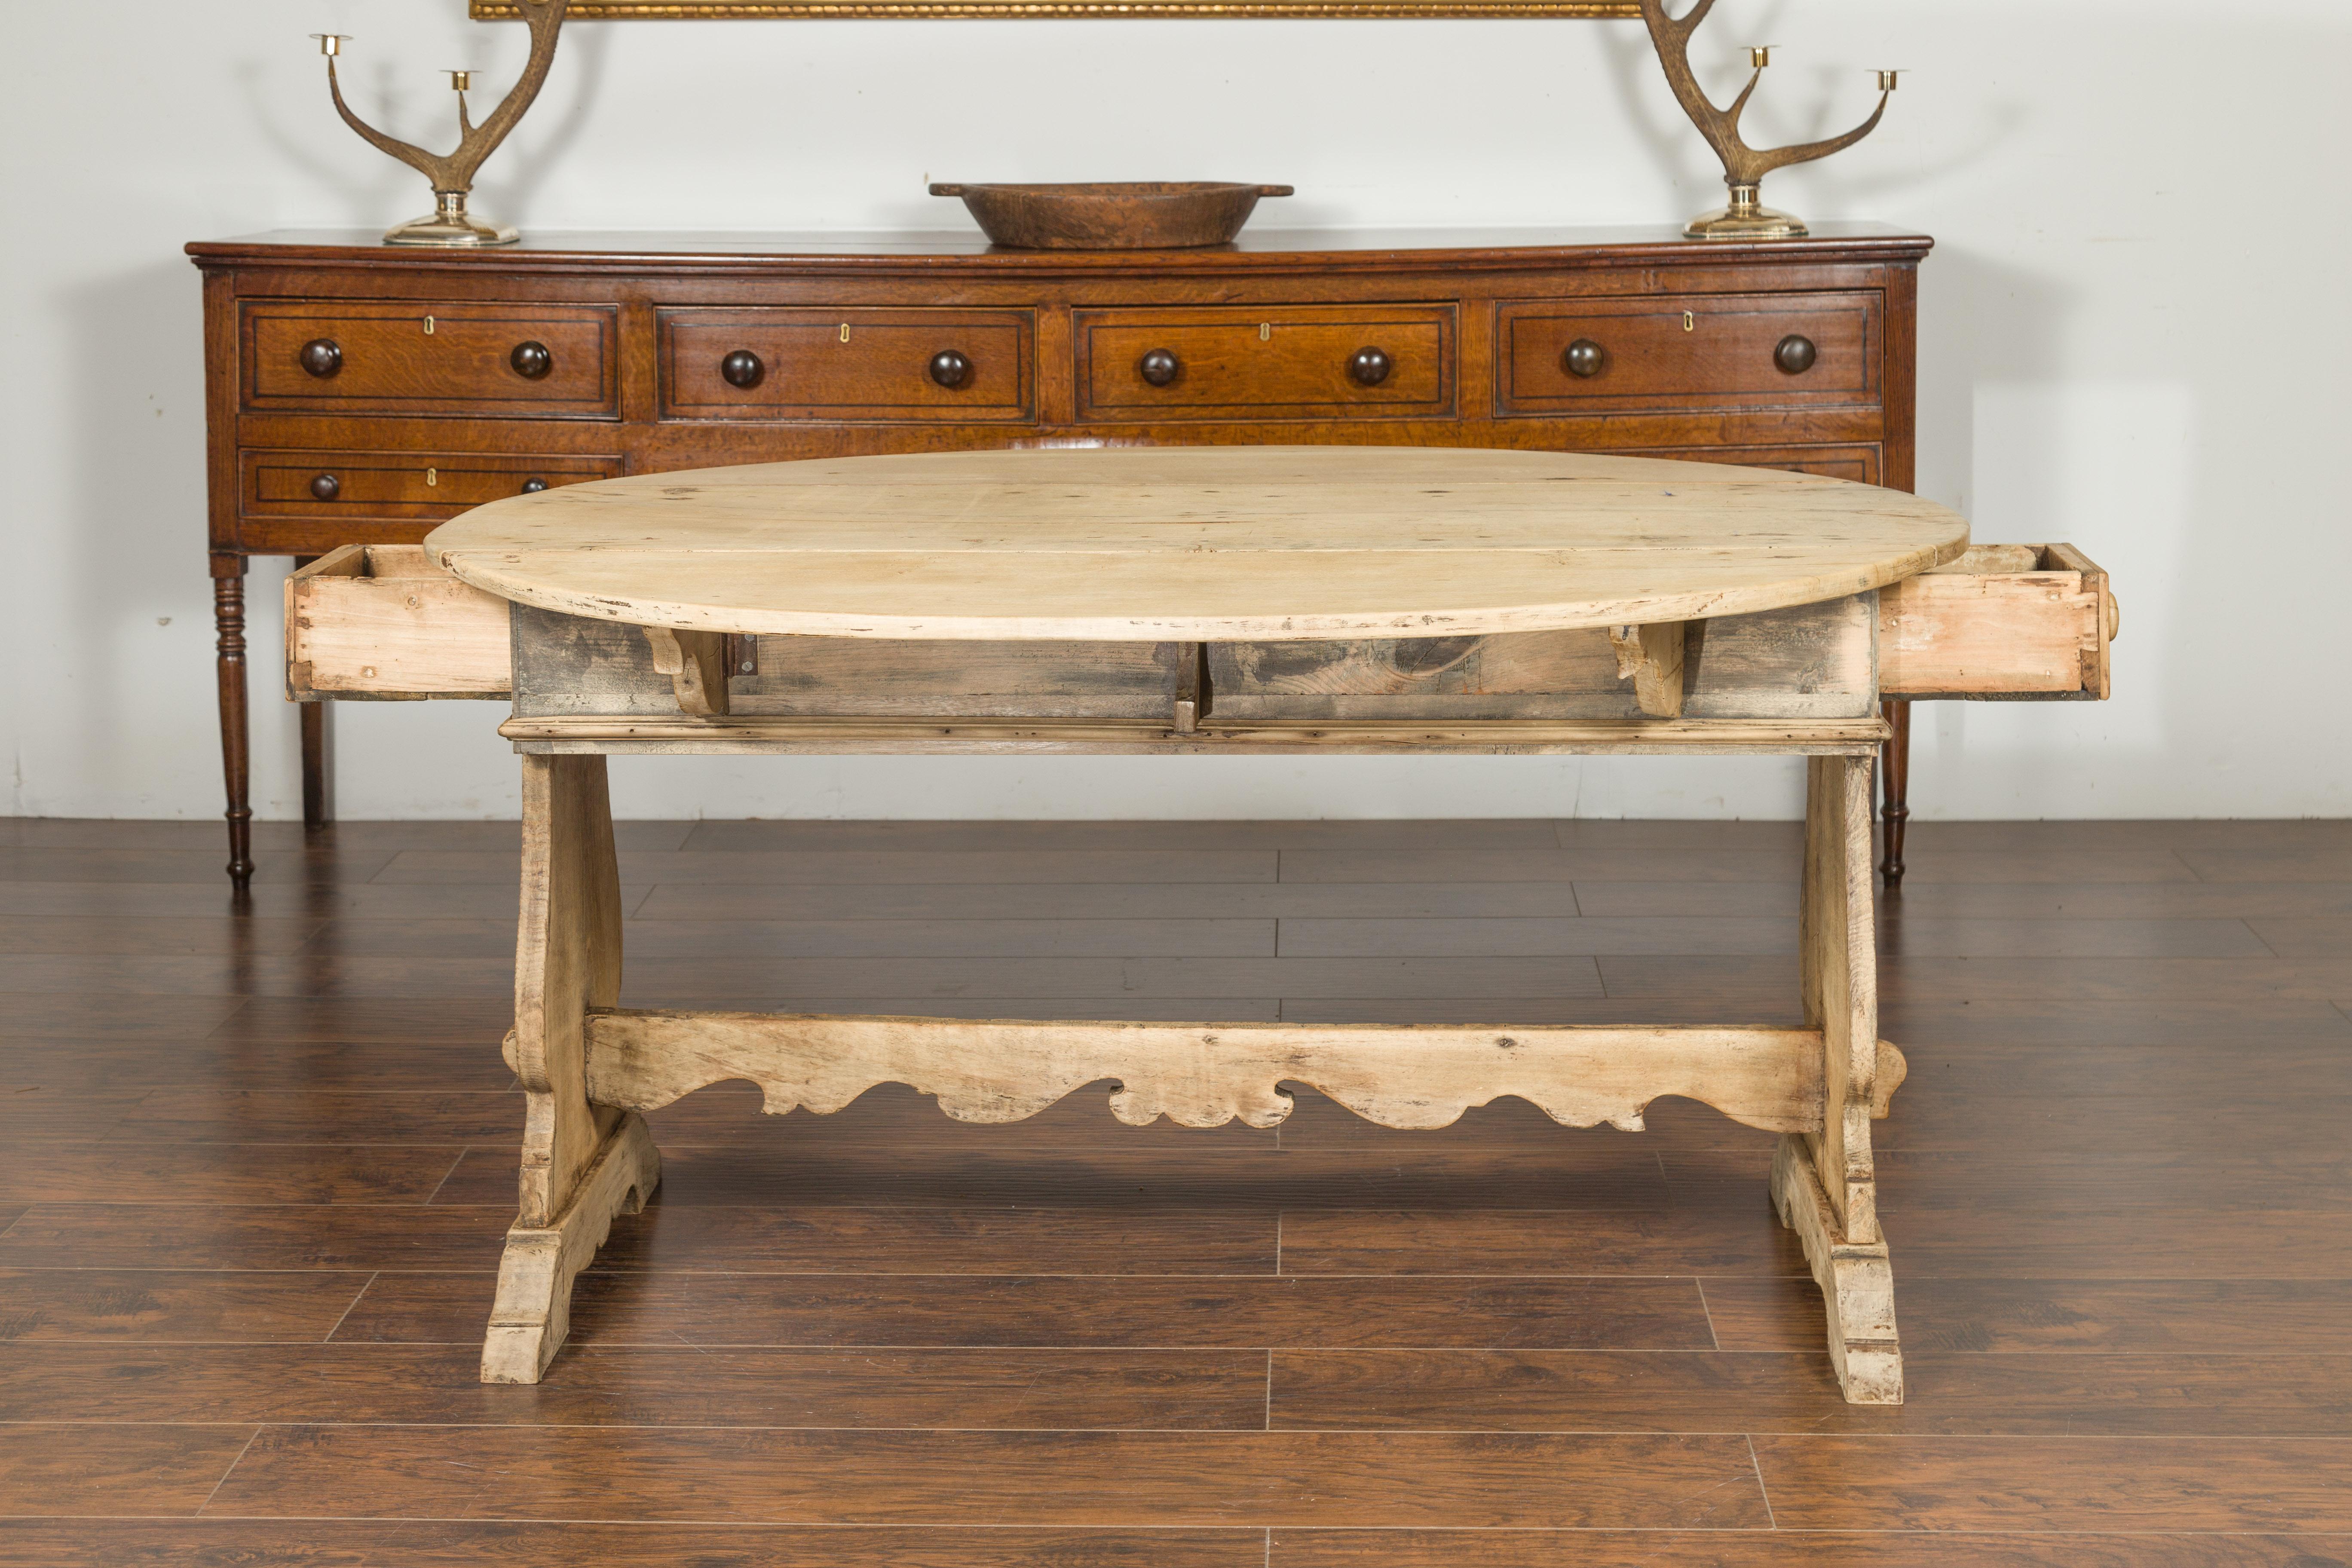 Oval Italian 1800s Bleached Walnut Drop-Leaf Trestle Table with Drawers For Sale 8